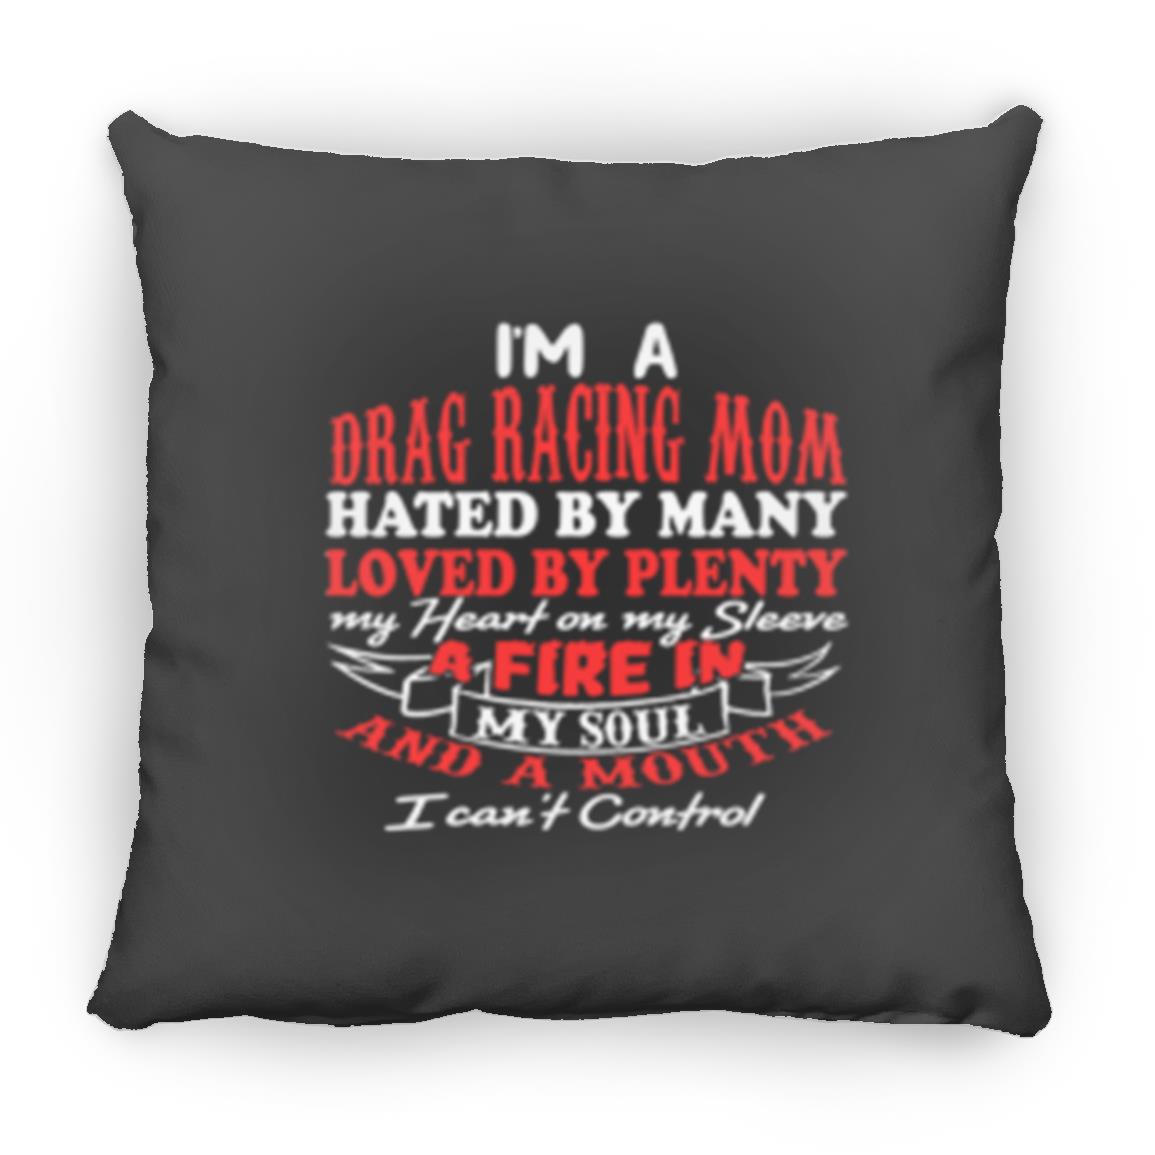 I'm A Drag Racing Mom Hated By Many Loved By Plenty Medium Square Pillow